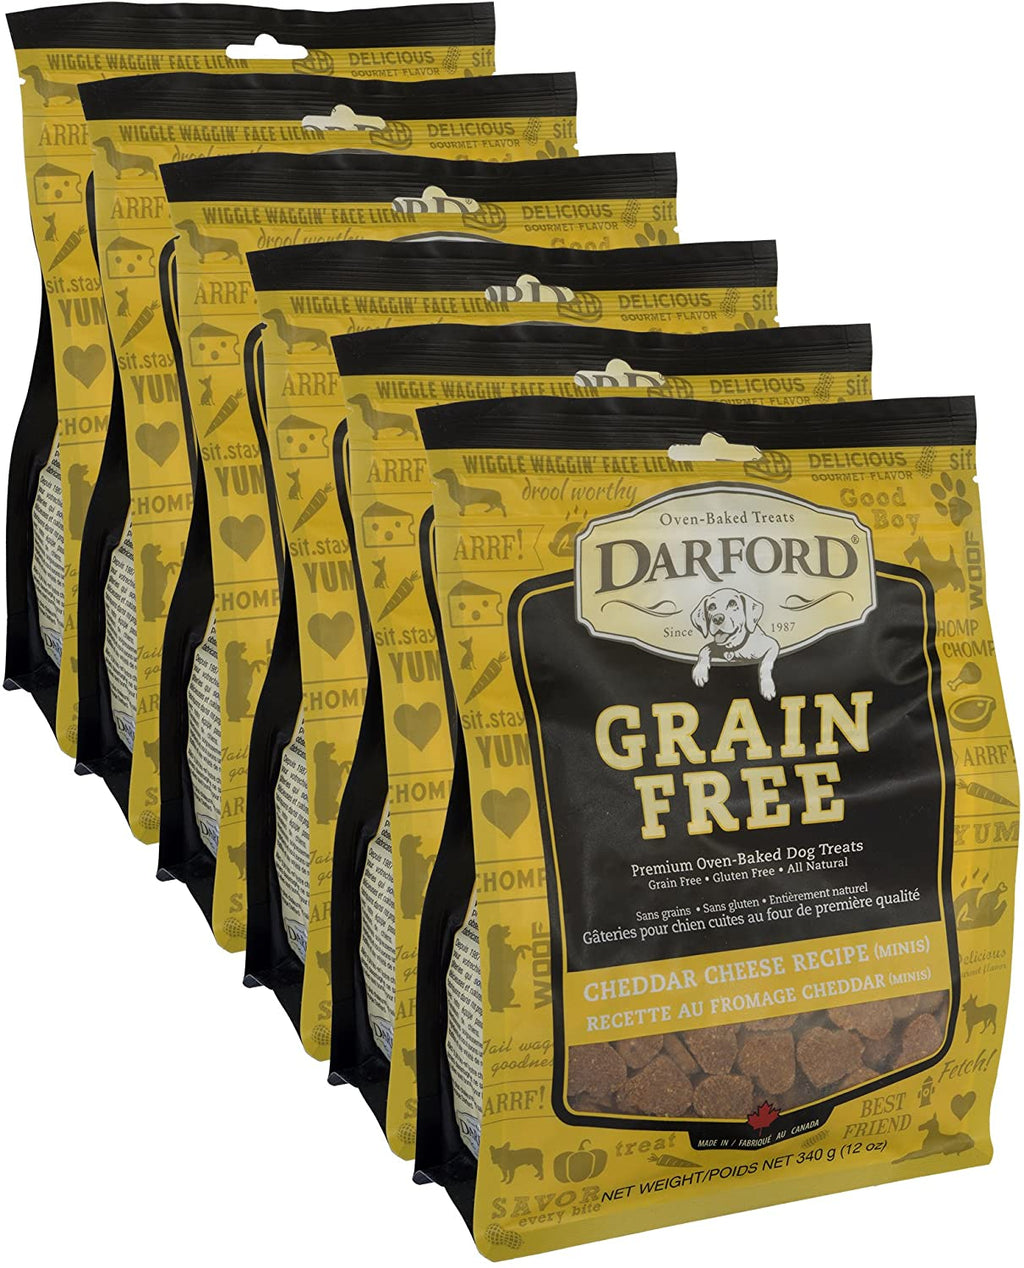 Darford Grain Free ChedDarford Cheese Mini's Dog Biscuit Treats - 12 oz - Case of 6  